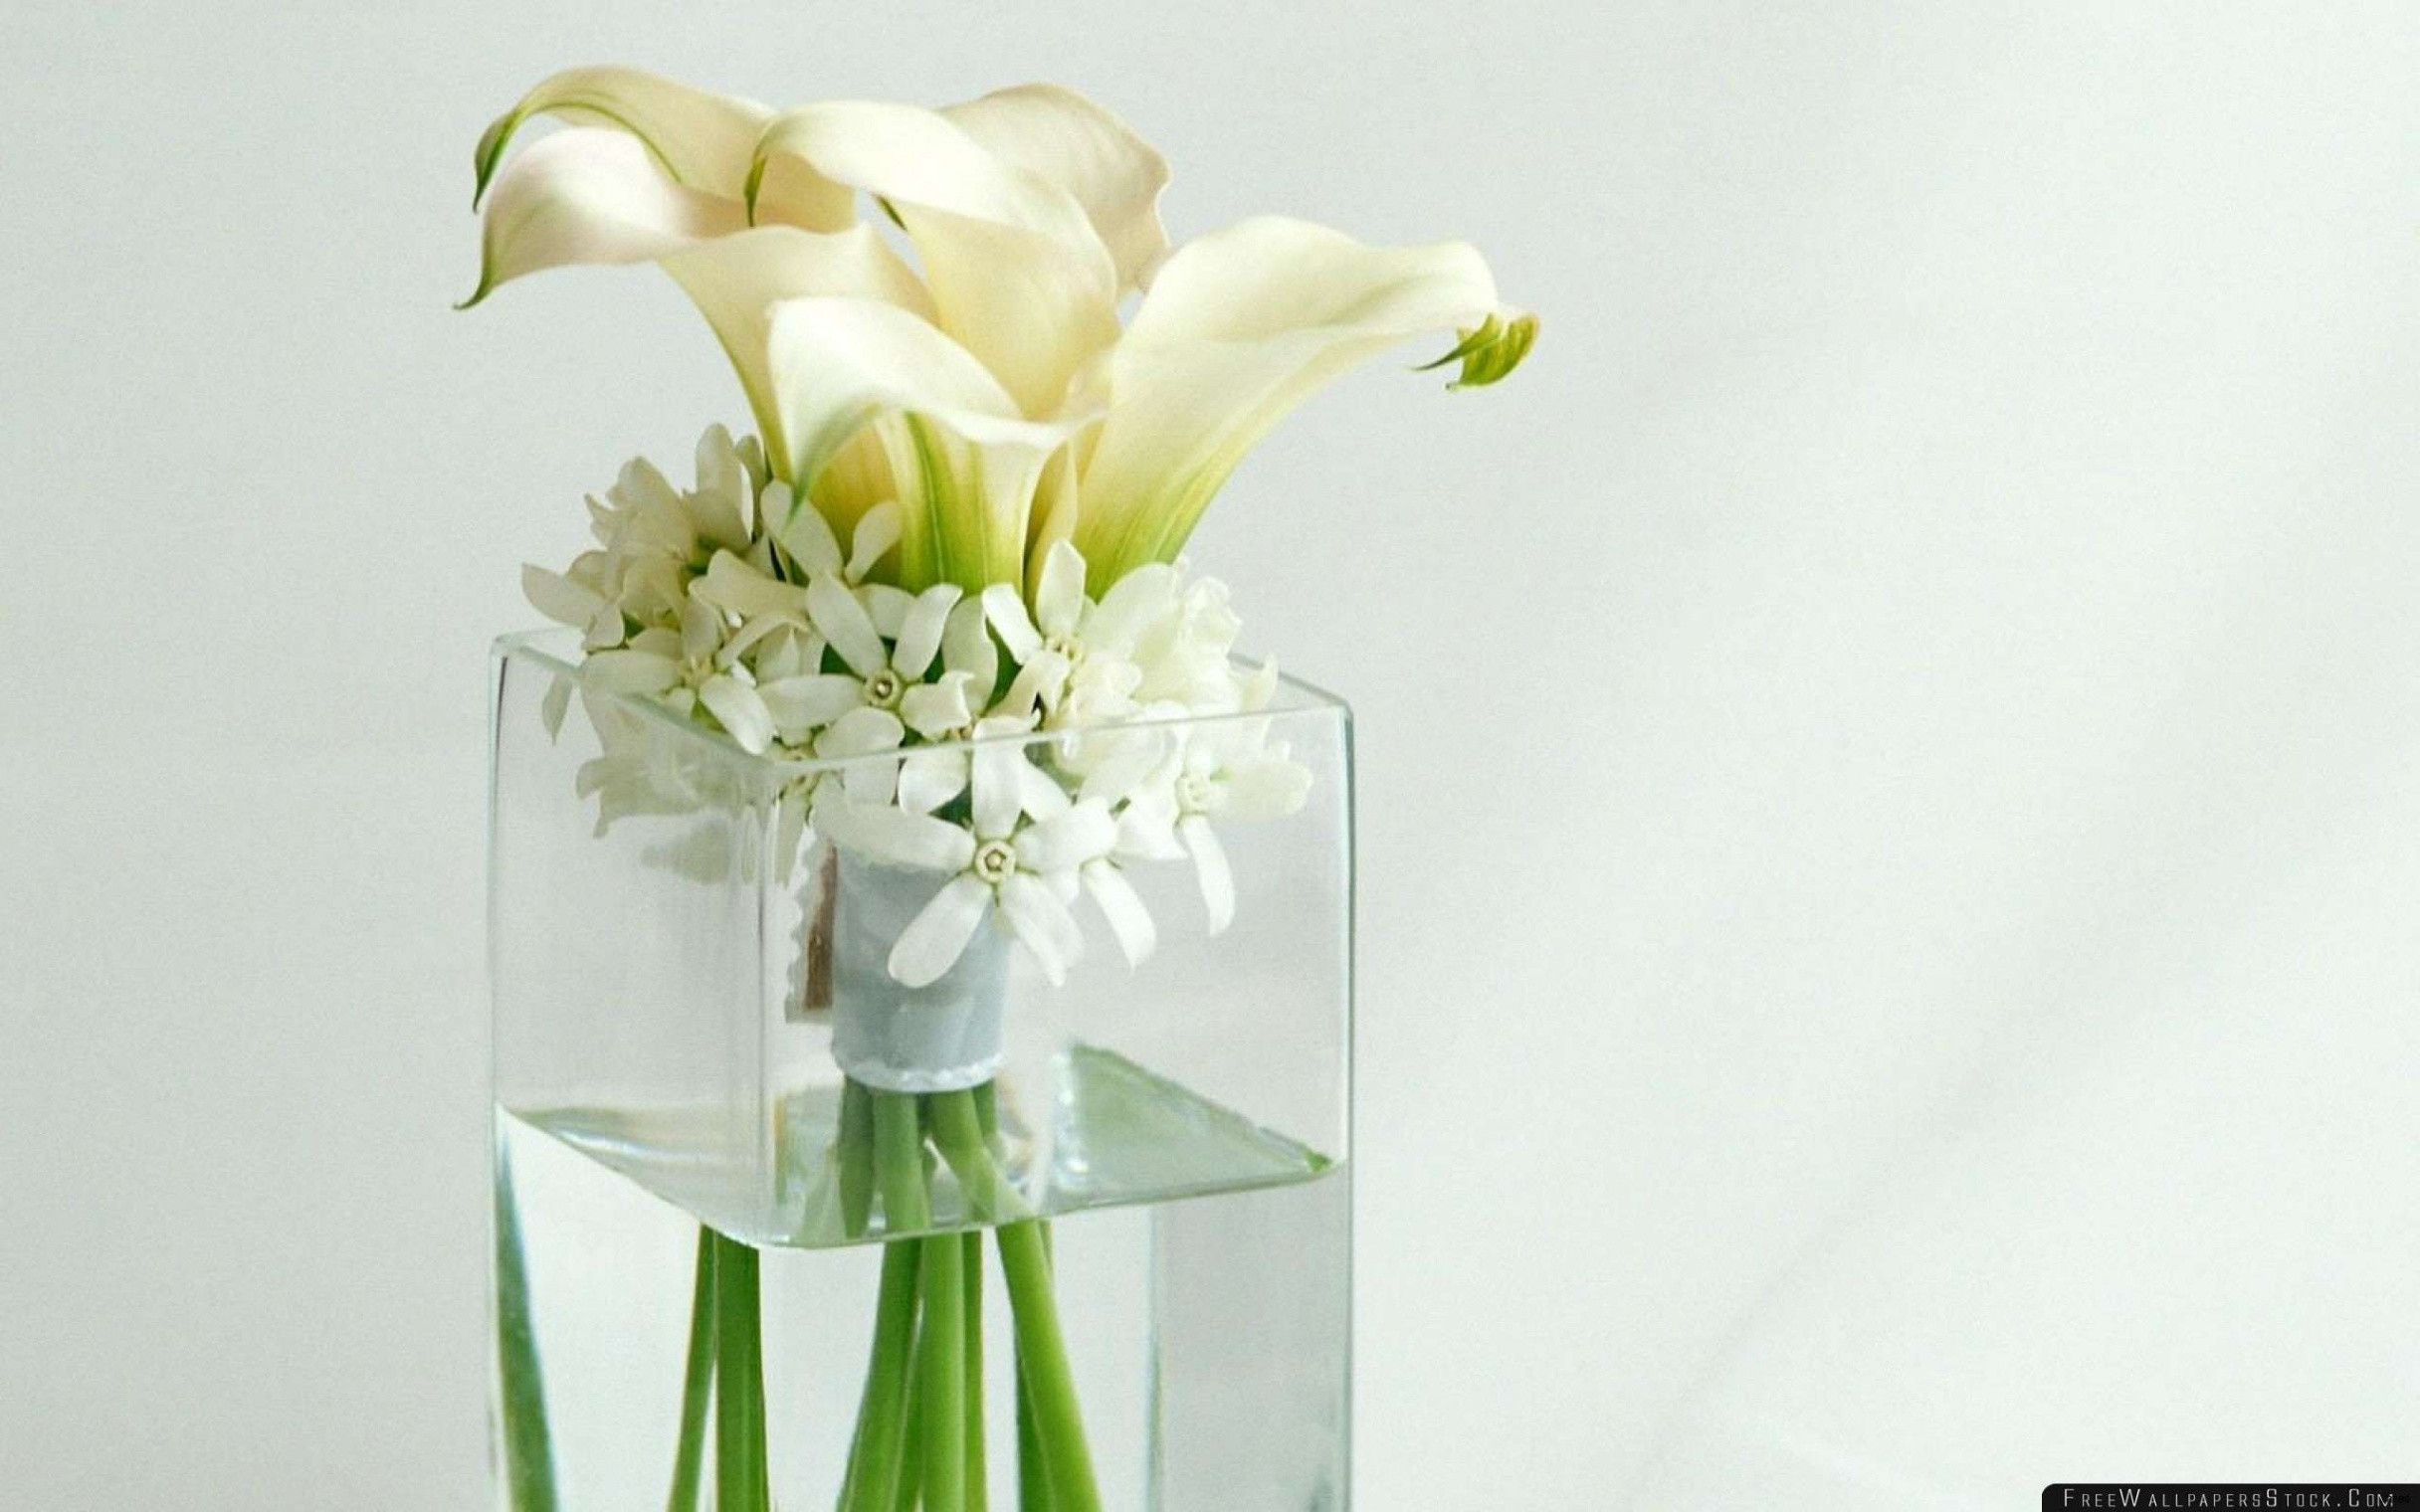 22 Popular Clear Plastic Vases for Weddings 2024 free download clear plastic vases for weddings of h vases for flower arrangements i 0d dry inspiration picture design within image de tall vase centerpiece ideas vases flowers in water 0d artificial vase 